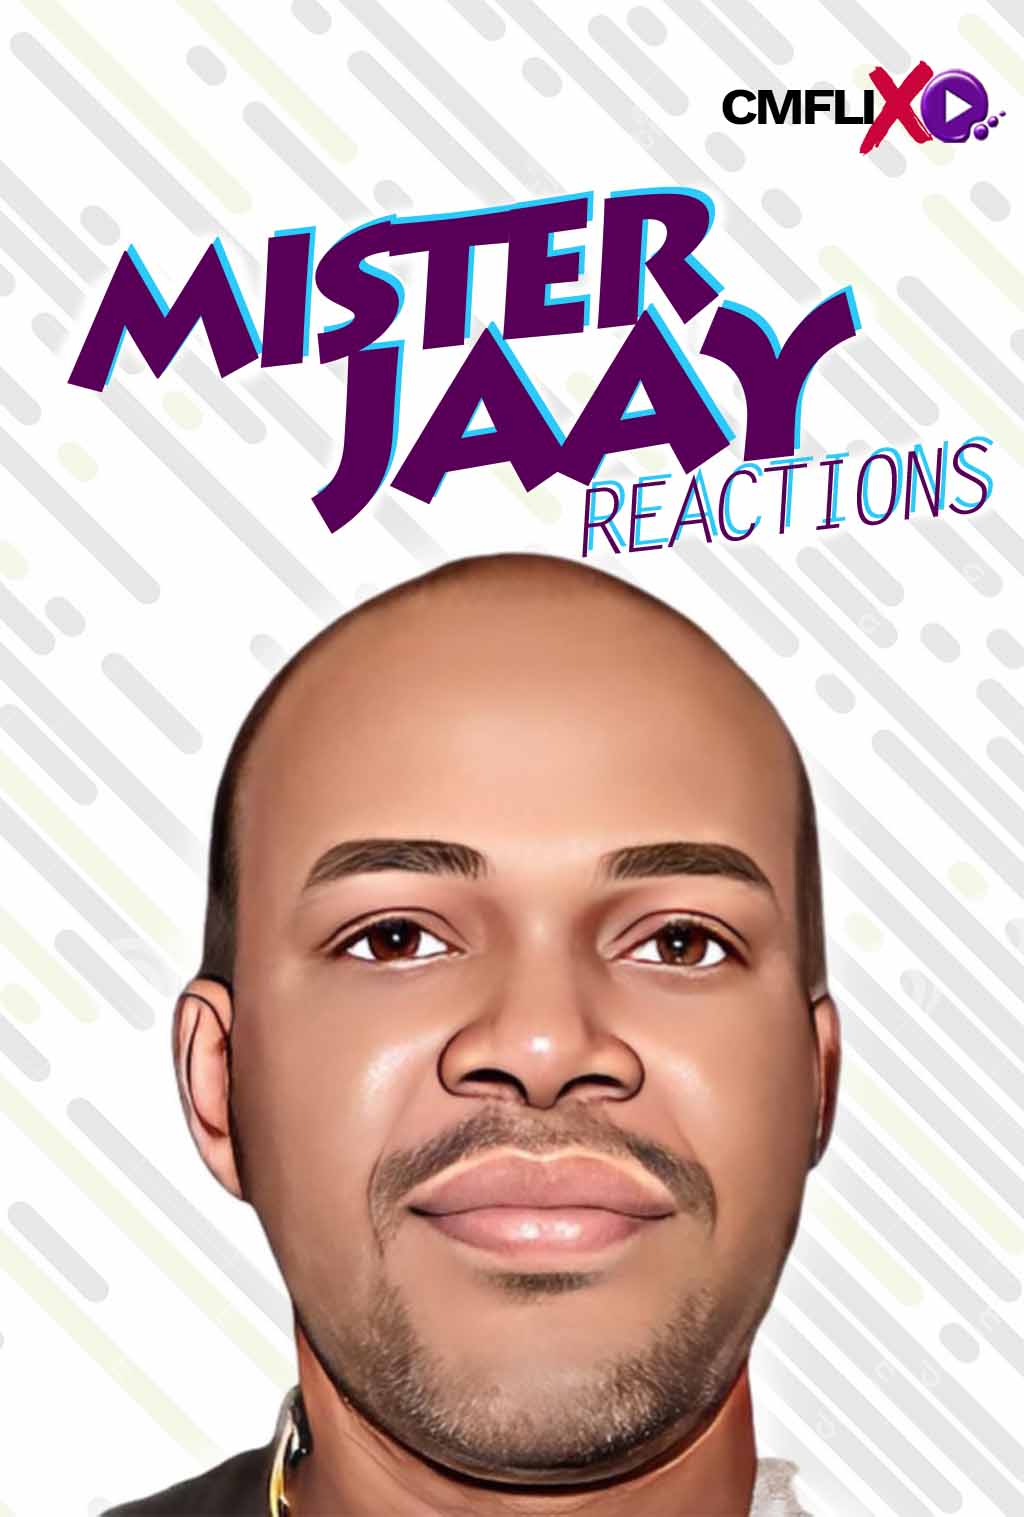 Mister Jaay Reactions